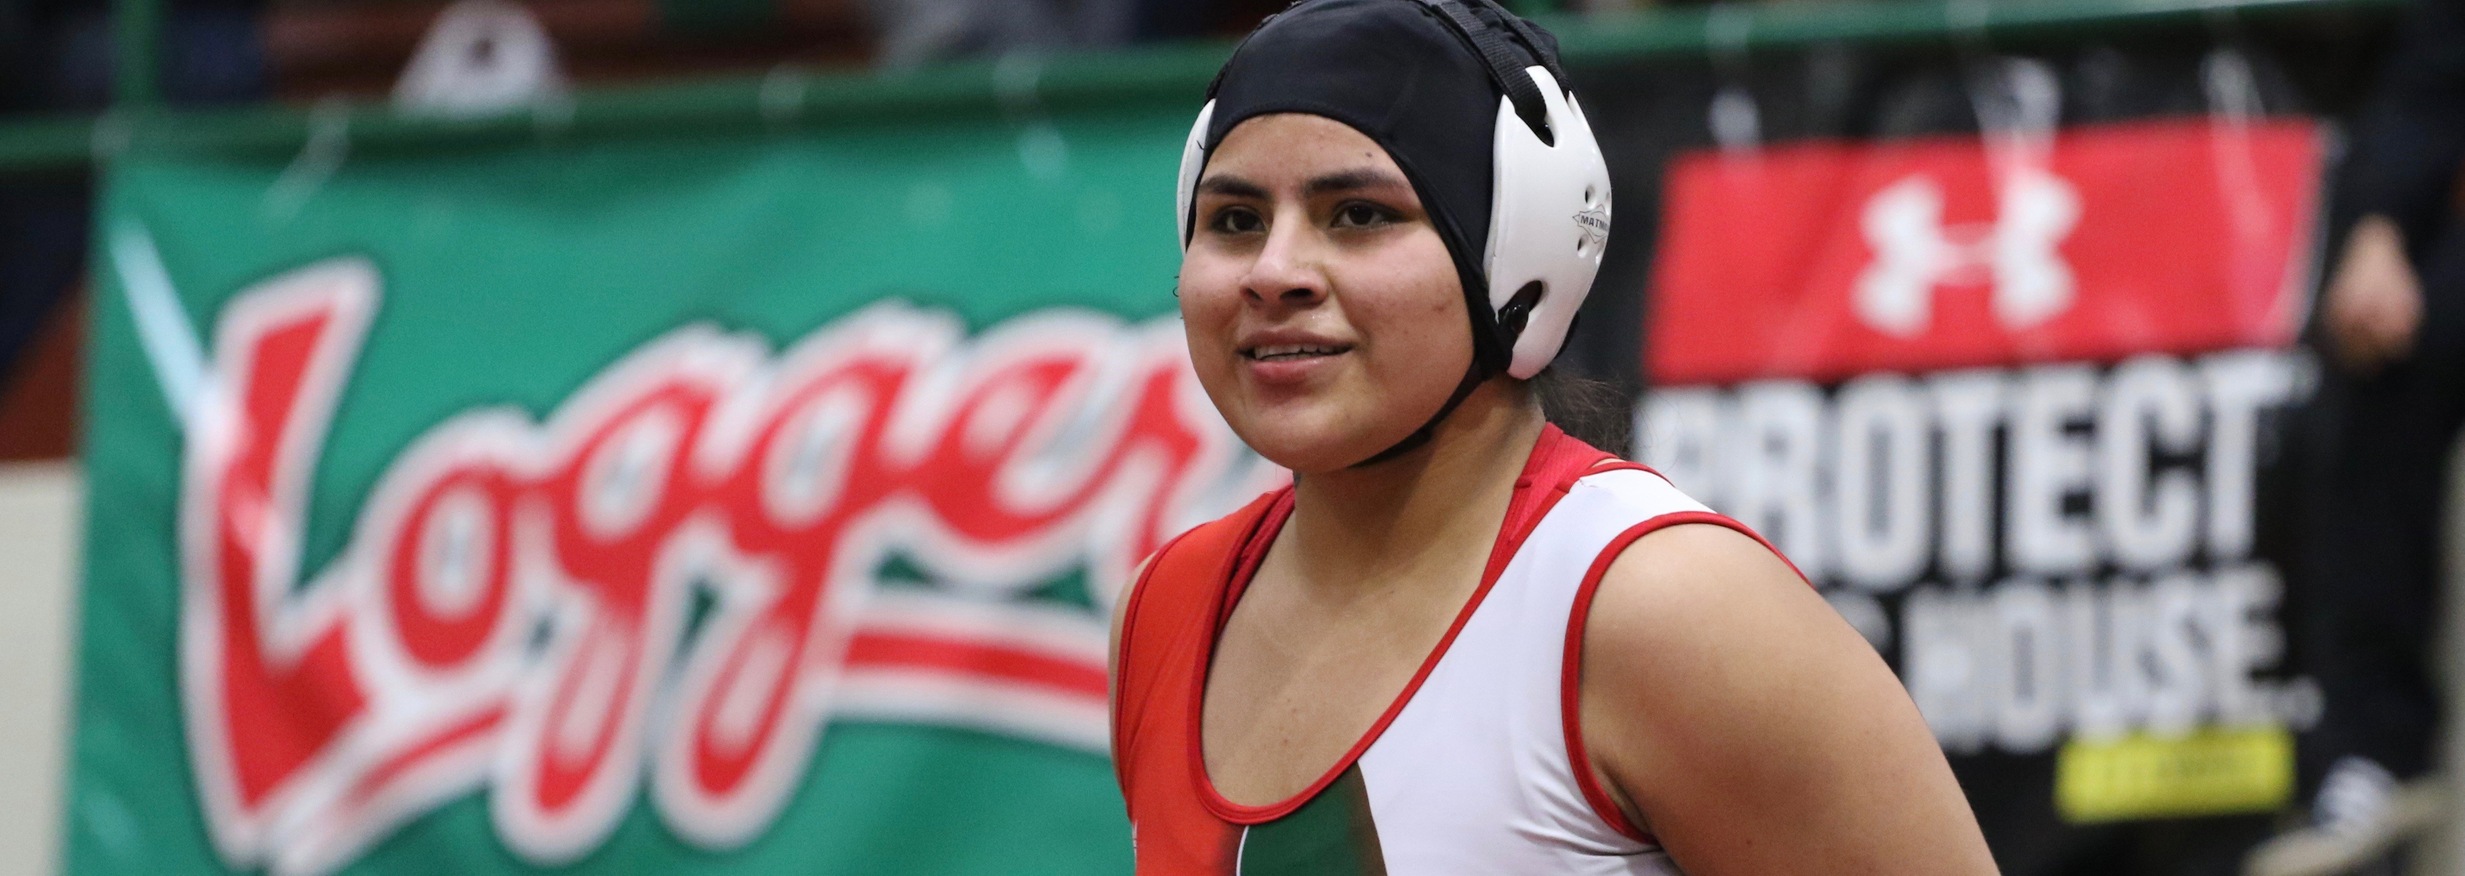 Two-Time California State Placer to Join RiverHawk Women’s Wrestling